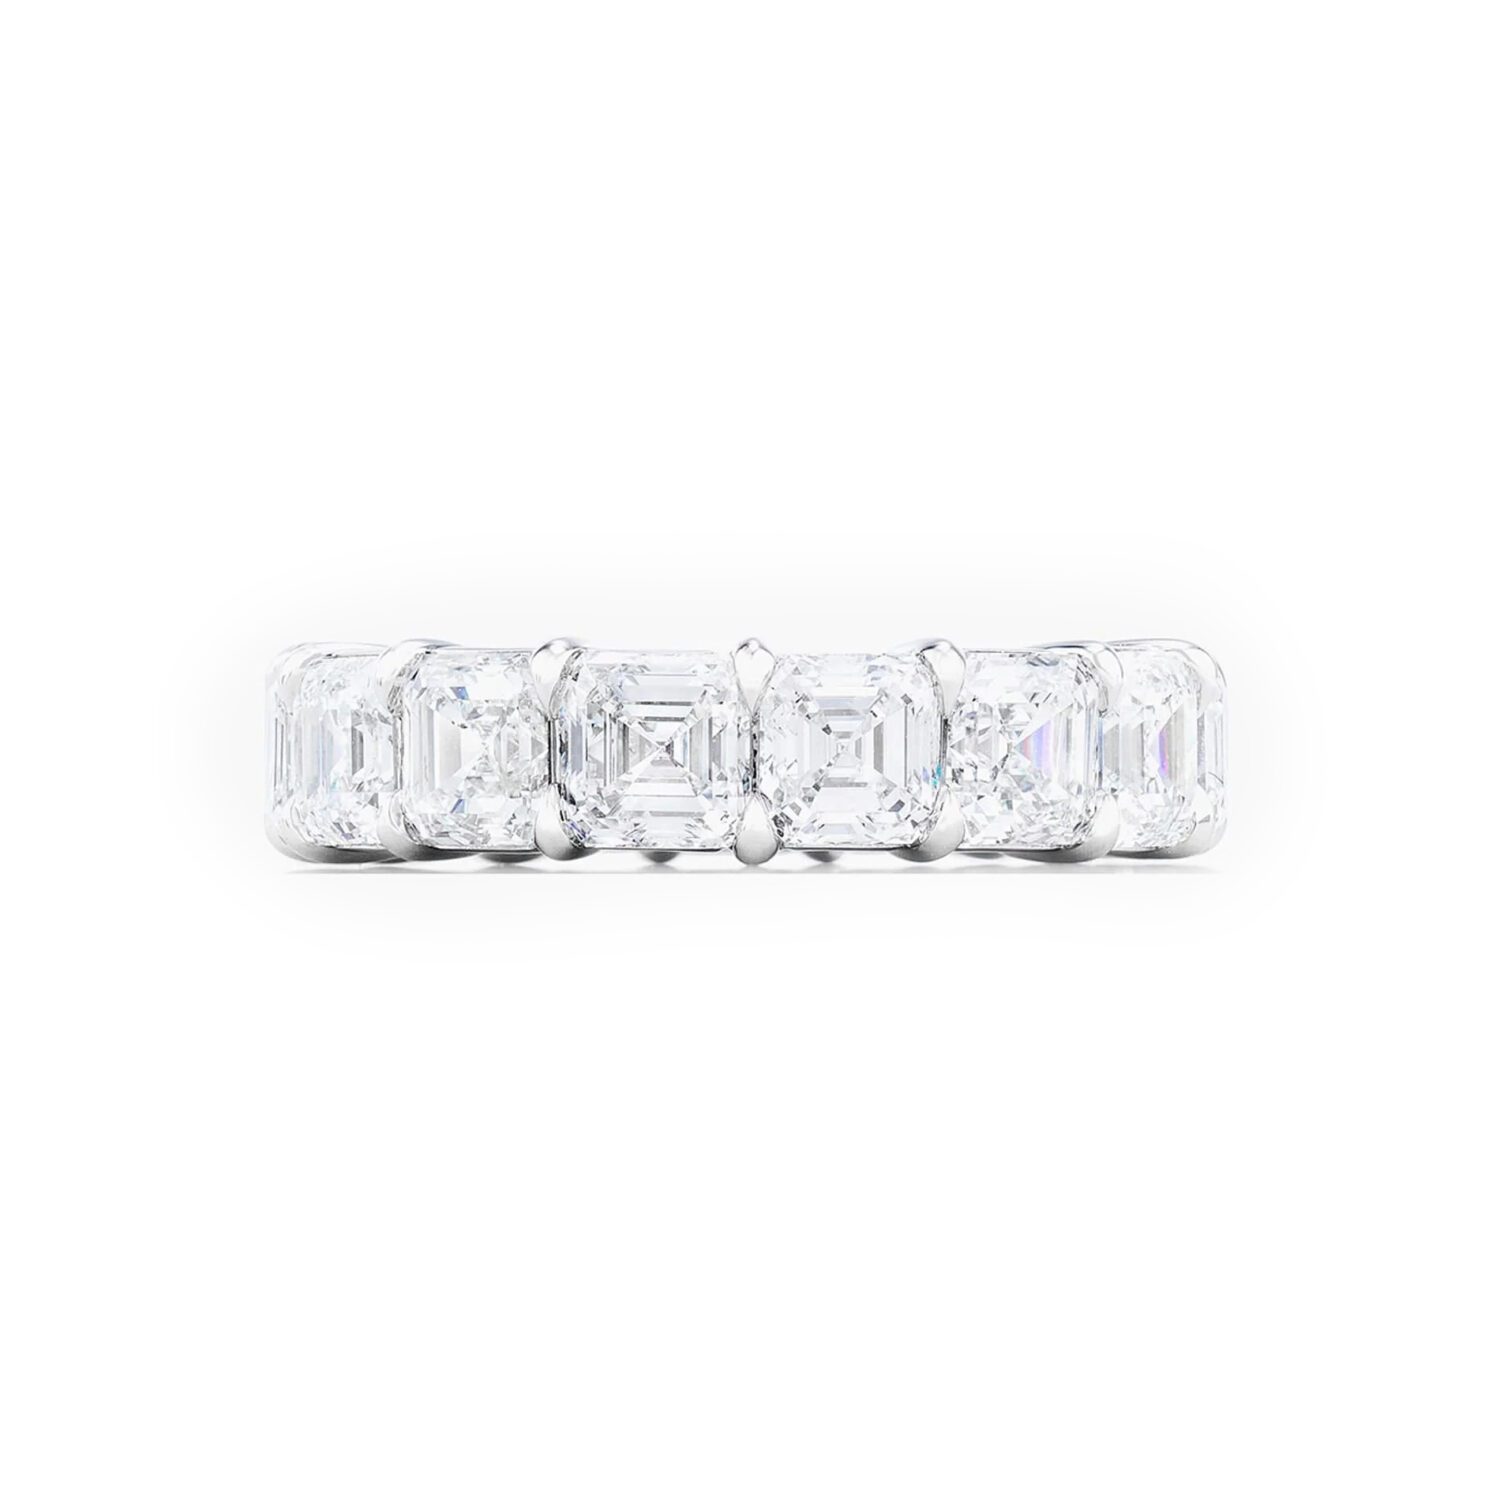 Lab grown diamonds in Cyprus - The Luxe Asscher Cut 4 ct to 11.25 ct Full Eternity Band Diamond Ring best quality and price